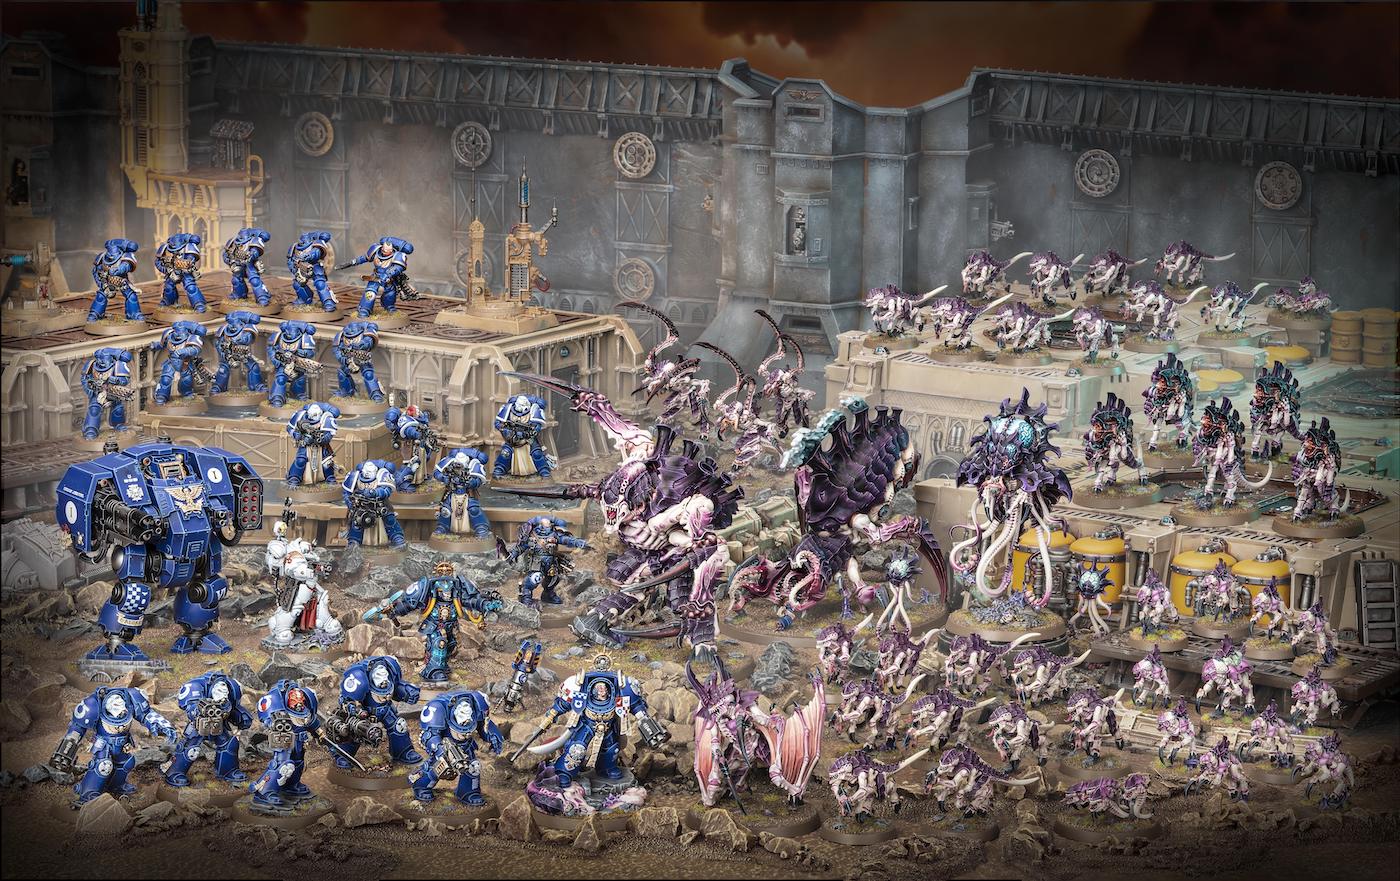 Win a year's worth of new Space Marines and Tyranids